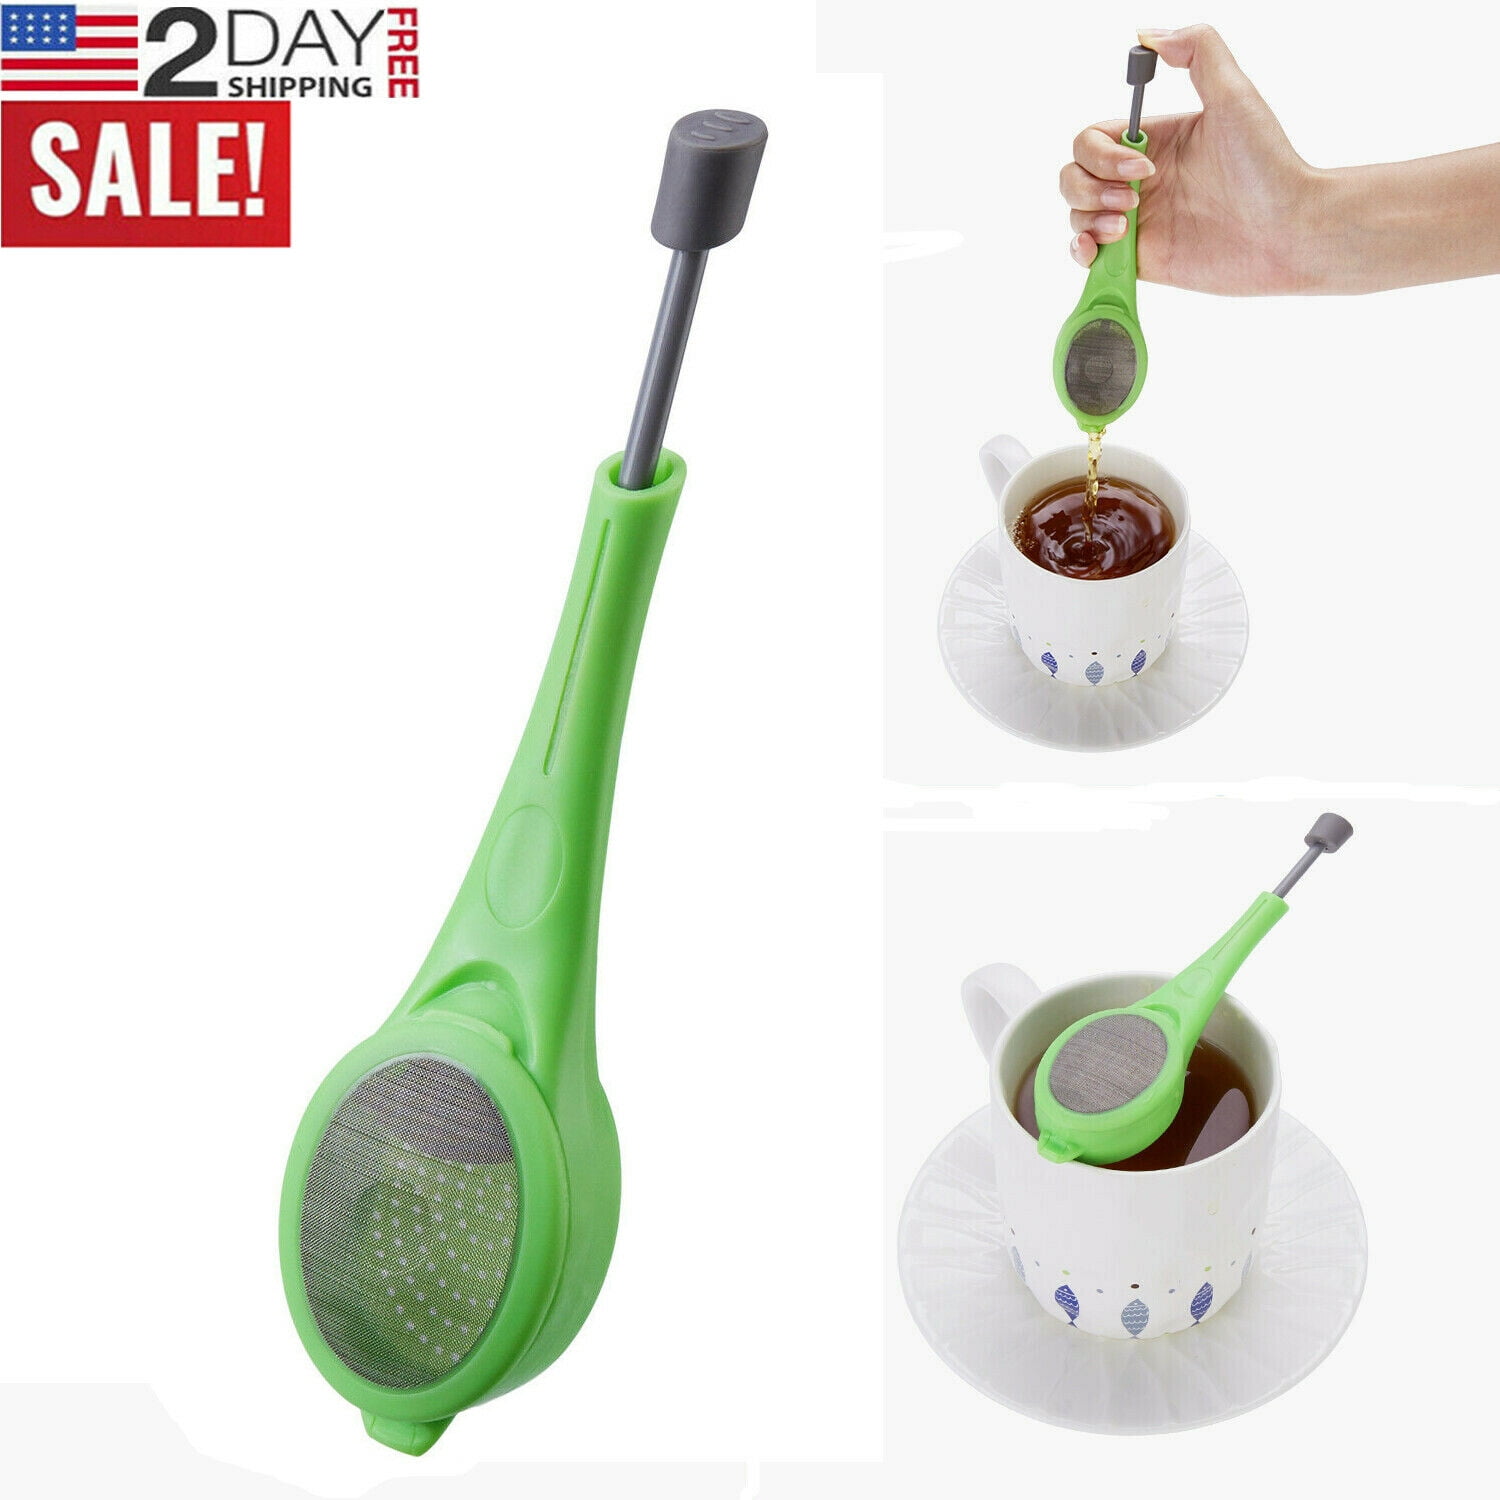 Silicone Infuser Herbal Spice Strainer Filter Tea Loose Leaf New 